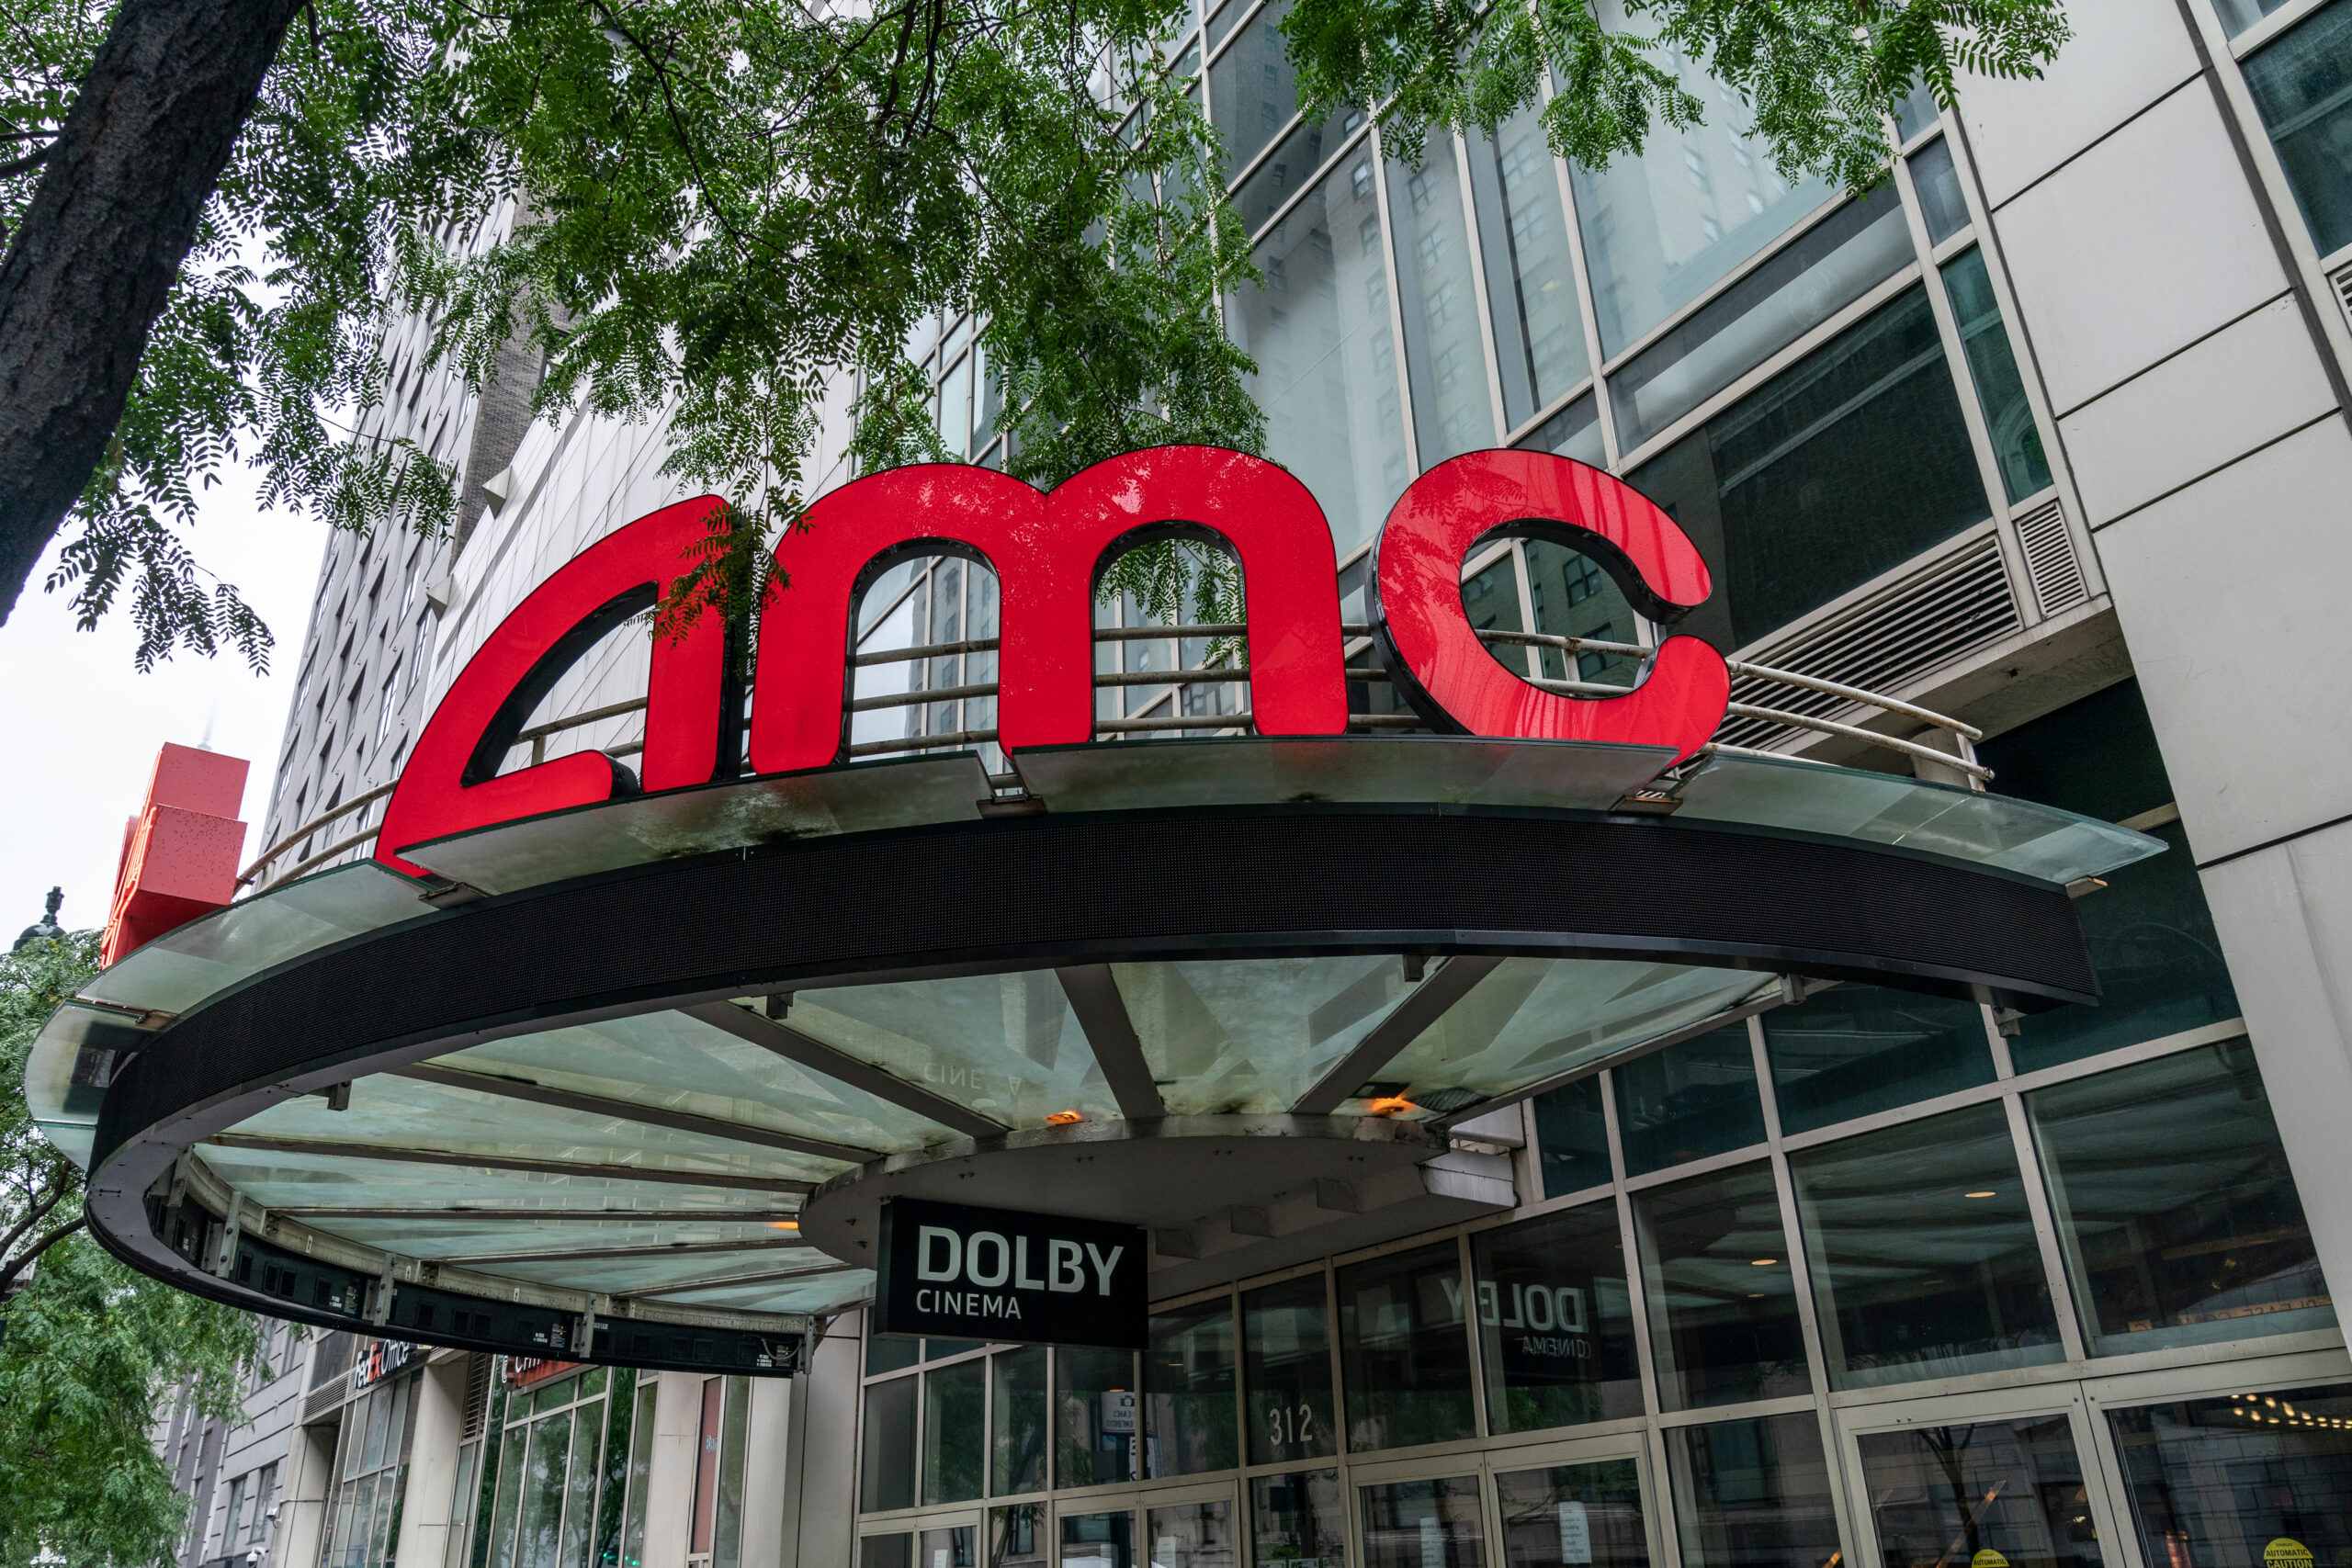 You Can Book a Private AMC Theater Showing Starting at $99